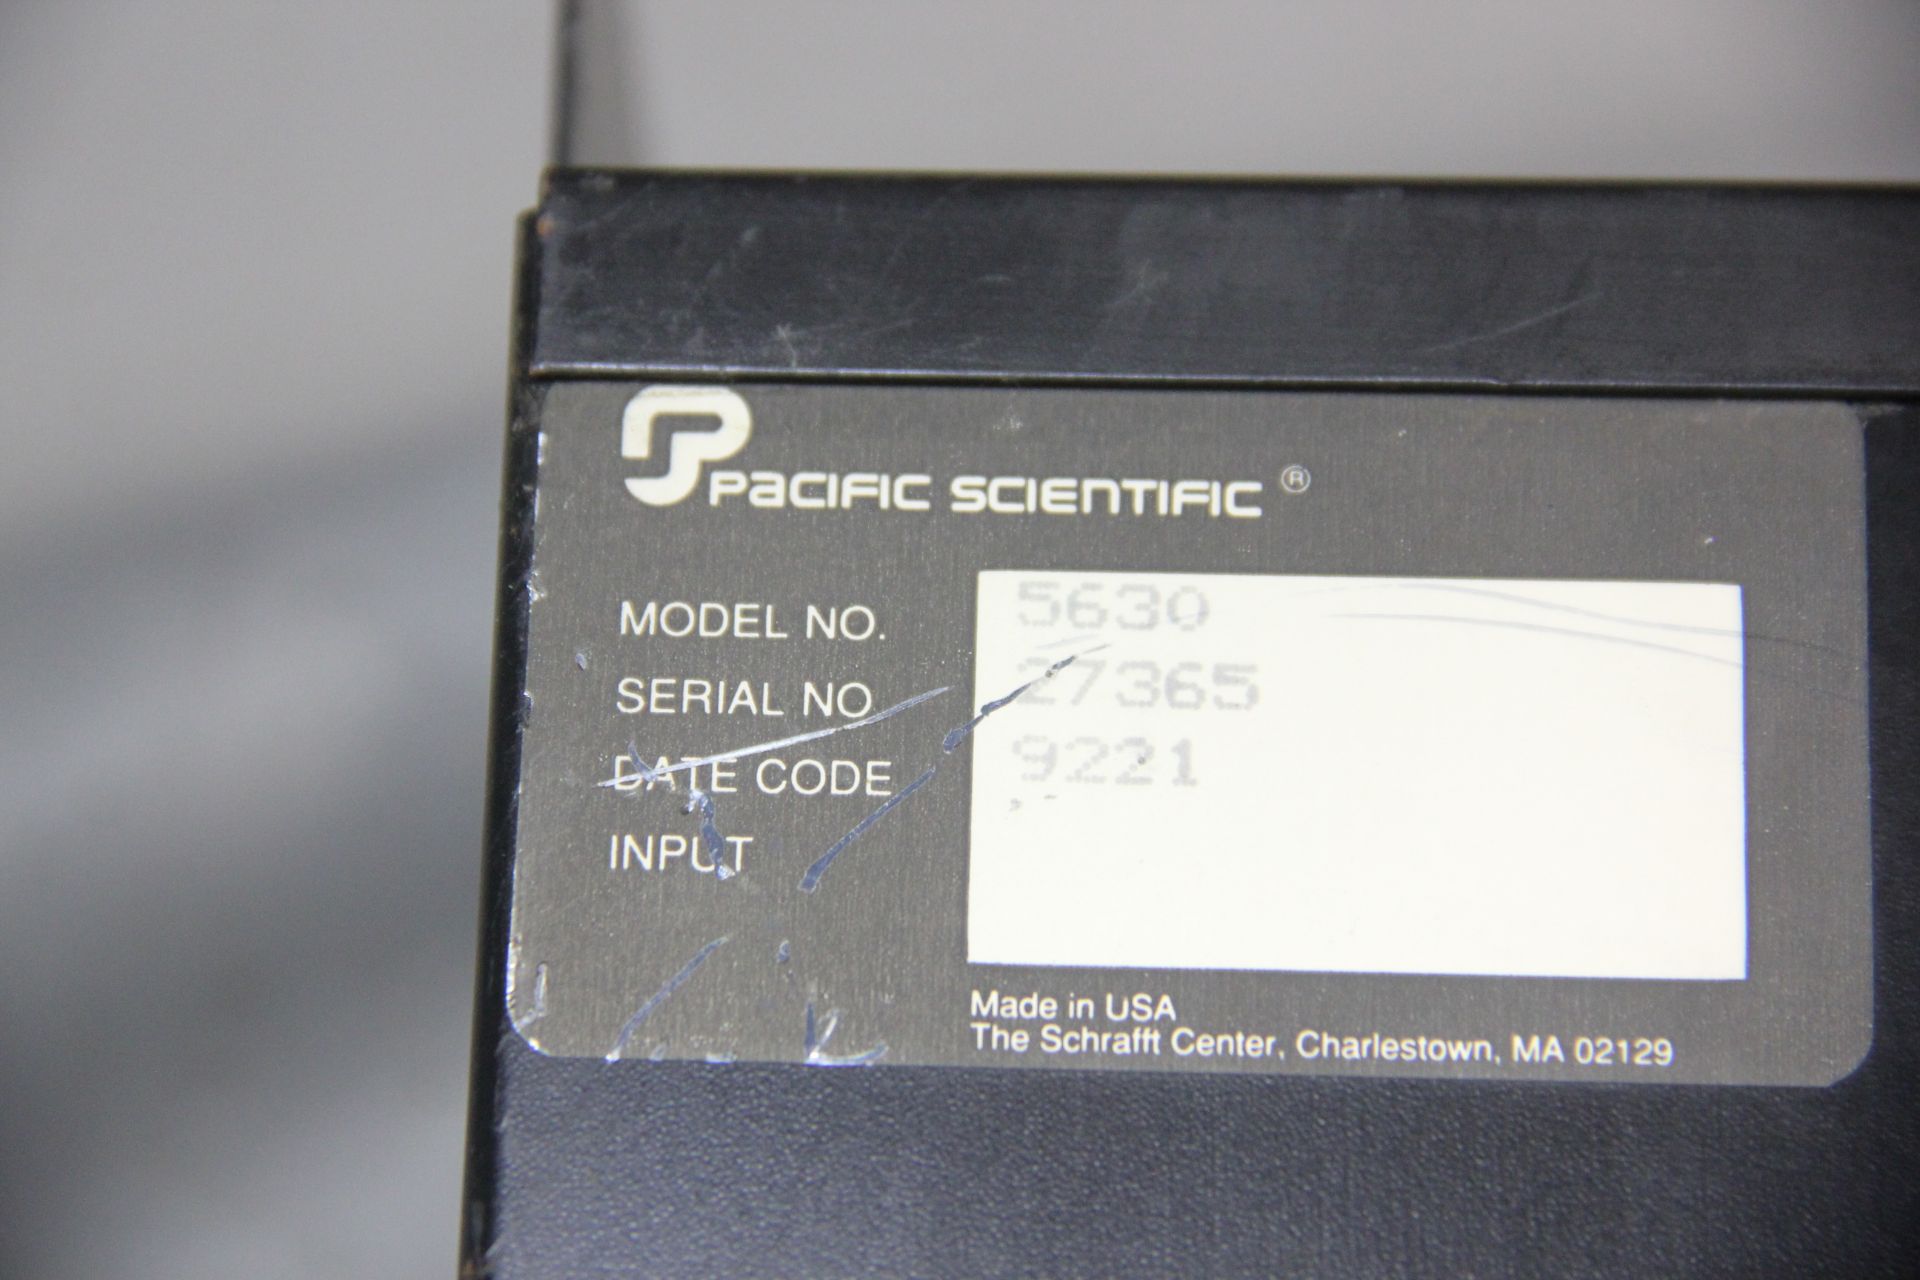 PACIFIC SCIENTIFIC MICROSTEP DRIVE - Image 5 of 5